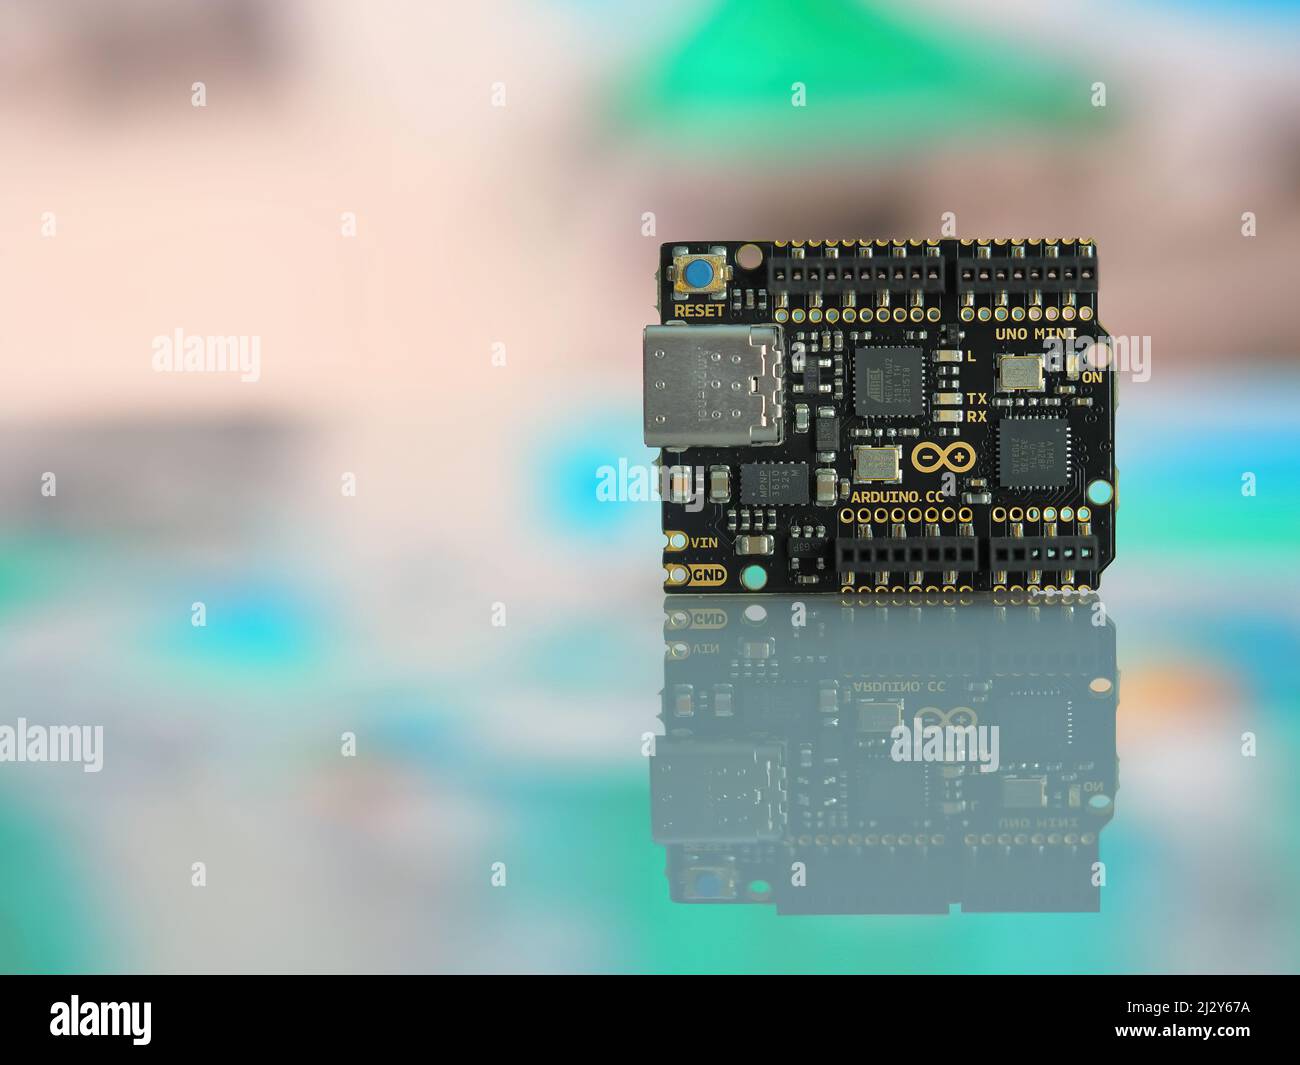 Galati, Romania - April 04, 2022: View of the new Arduino UNO Mini Limited Edition board isolated on blurry background Stock Photo